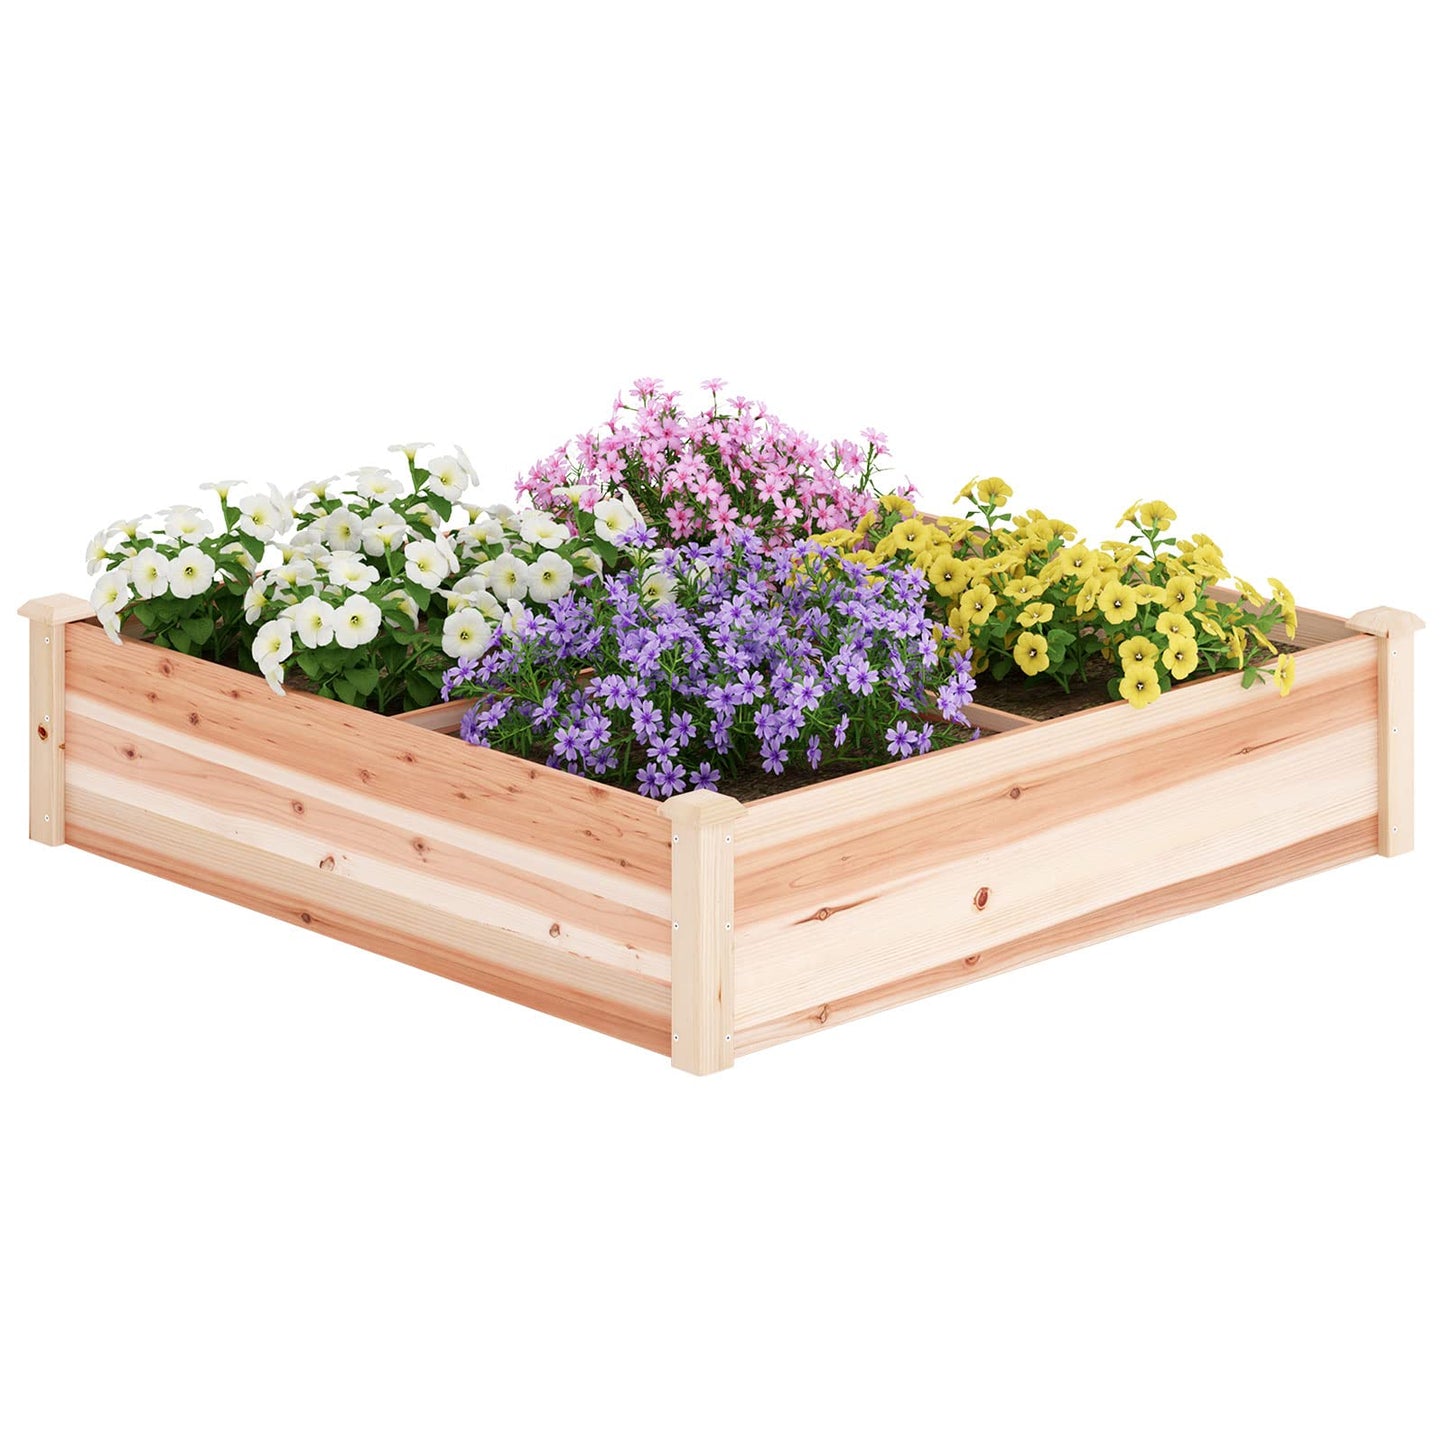 SogesHome Wooden Plant Raised Garden Bed, 46.9"x 46.9"x 10.4" Plant Grow Box with Divider, Outdoor Elevated Planter Box Kit, Planting Container Planting Bed for Vegetables, Flowers, Herb